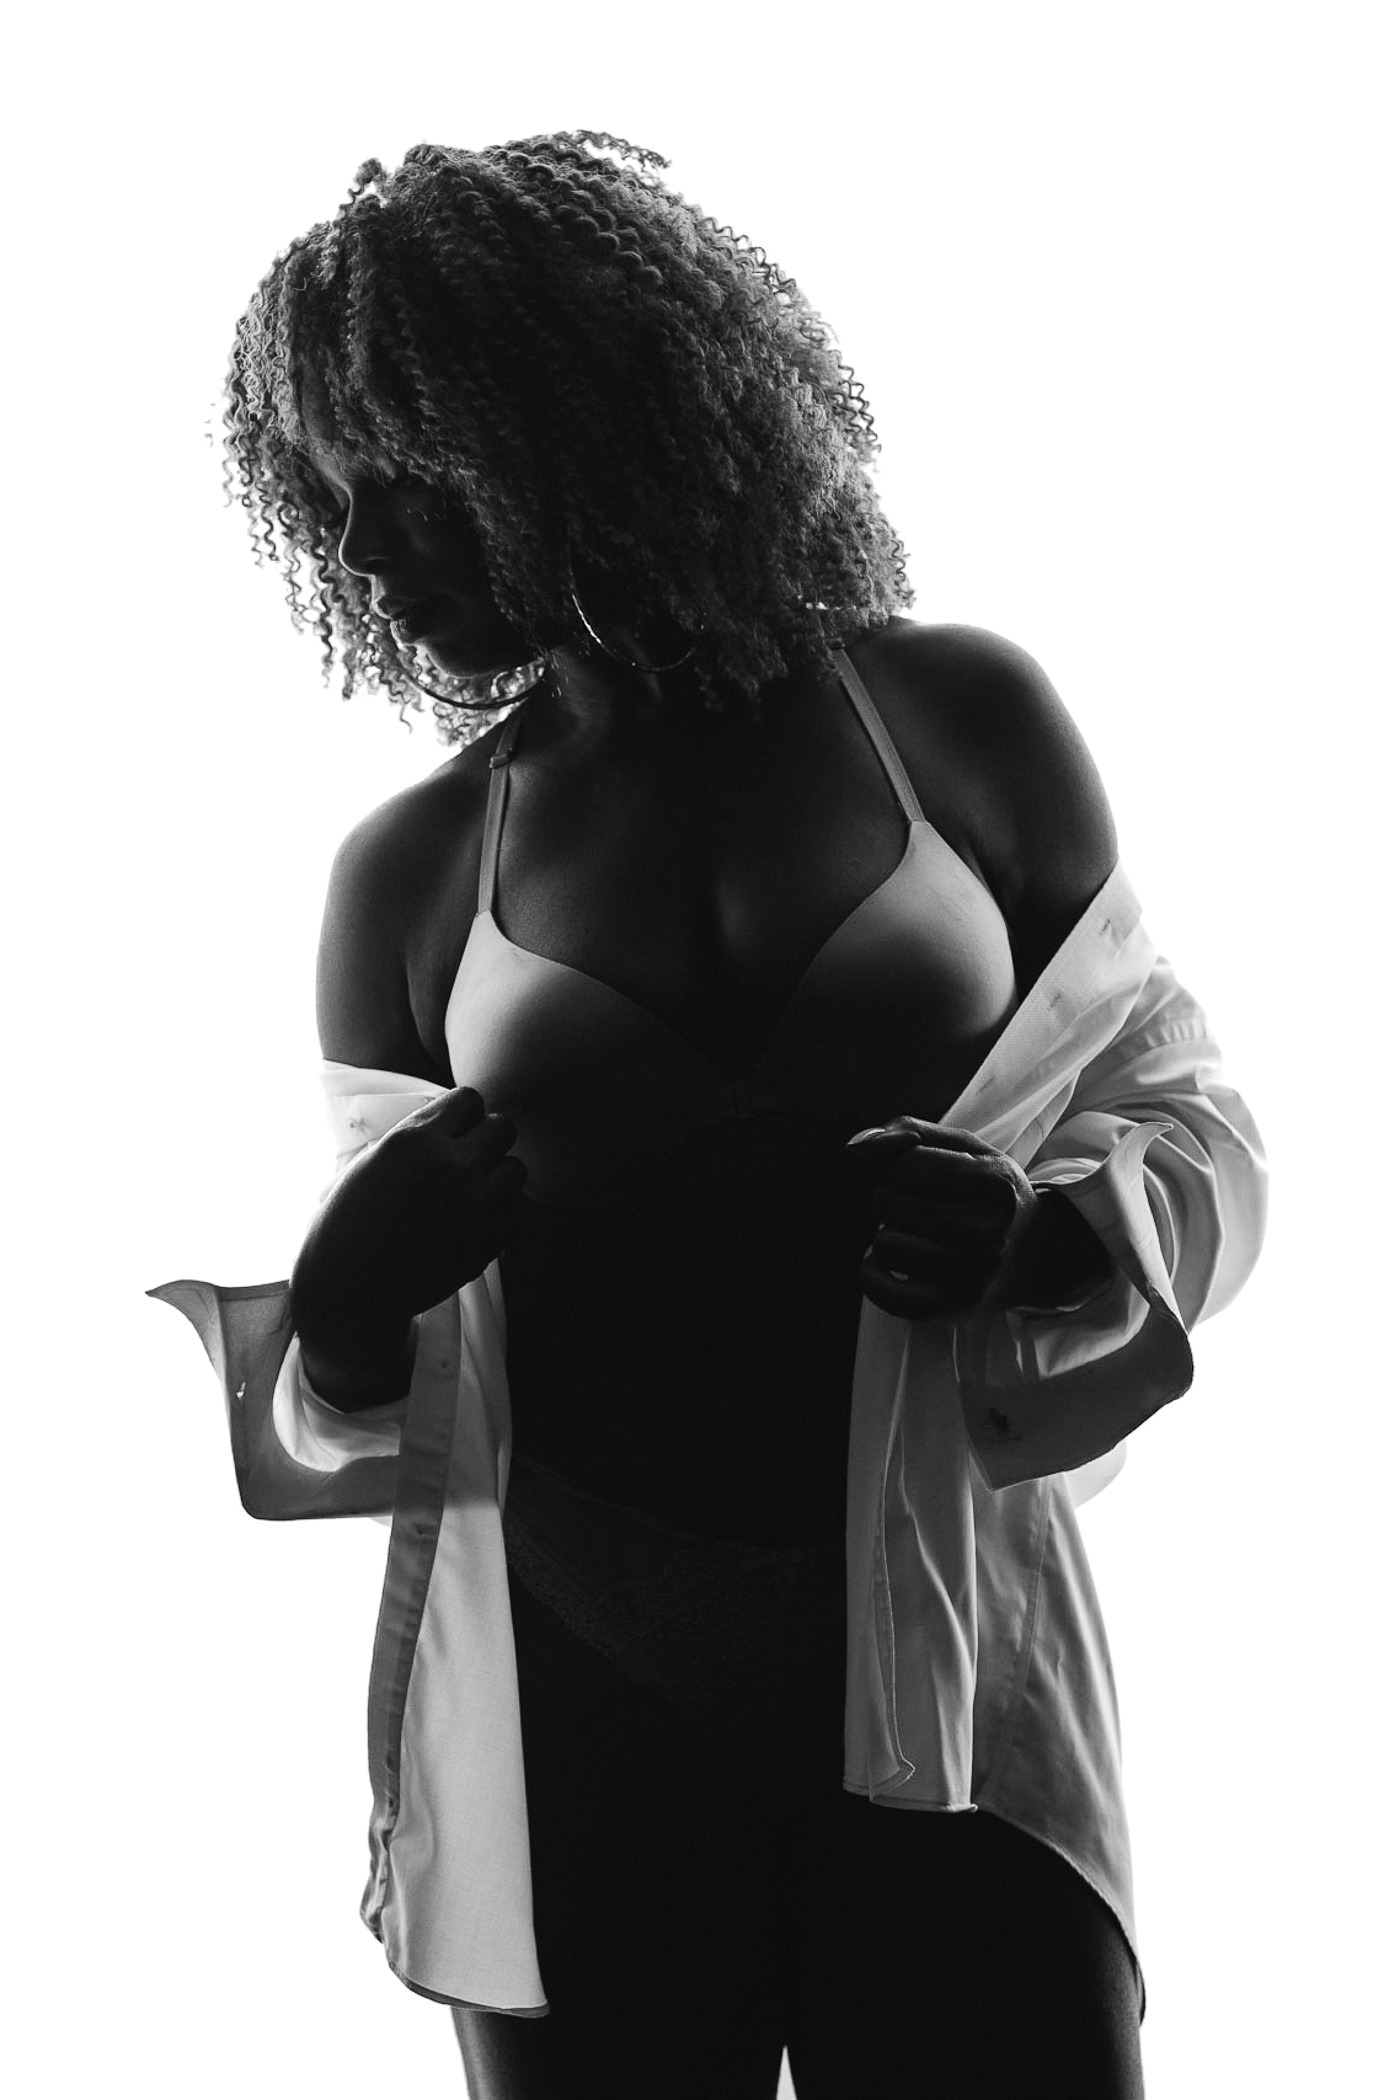 Gorgeous African American woman with amazing hair standing in partial silhouette while pulling boyfriend's white work shirt around her body and off her shoulders for boudoir photographs